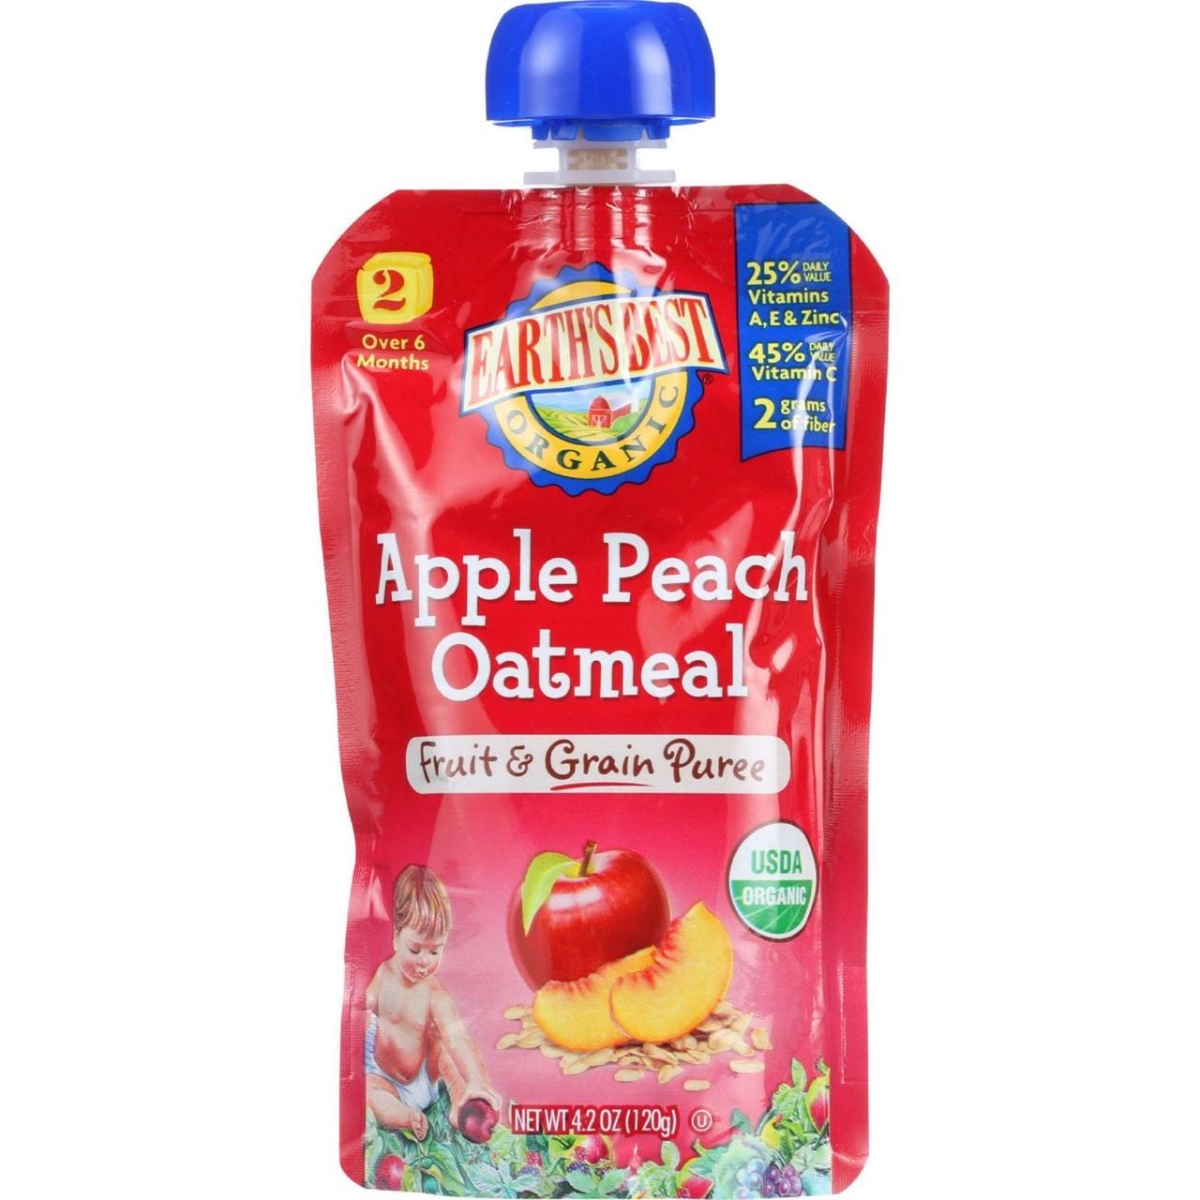 Hg1154848 4.2 Oz Organic Fruit & Grain Puree Baby Food For Age 6 Months Plus, Stage 2 -apple Peach Oatmeal, Case Of 12